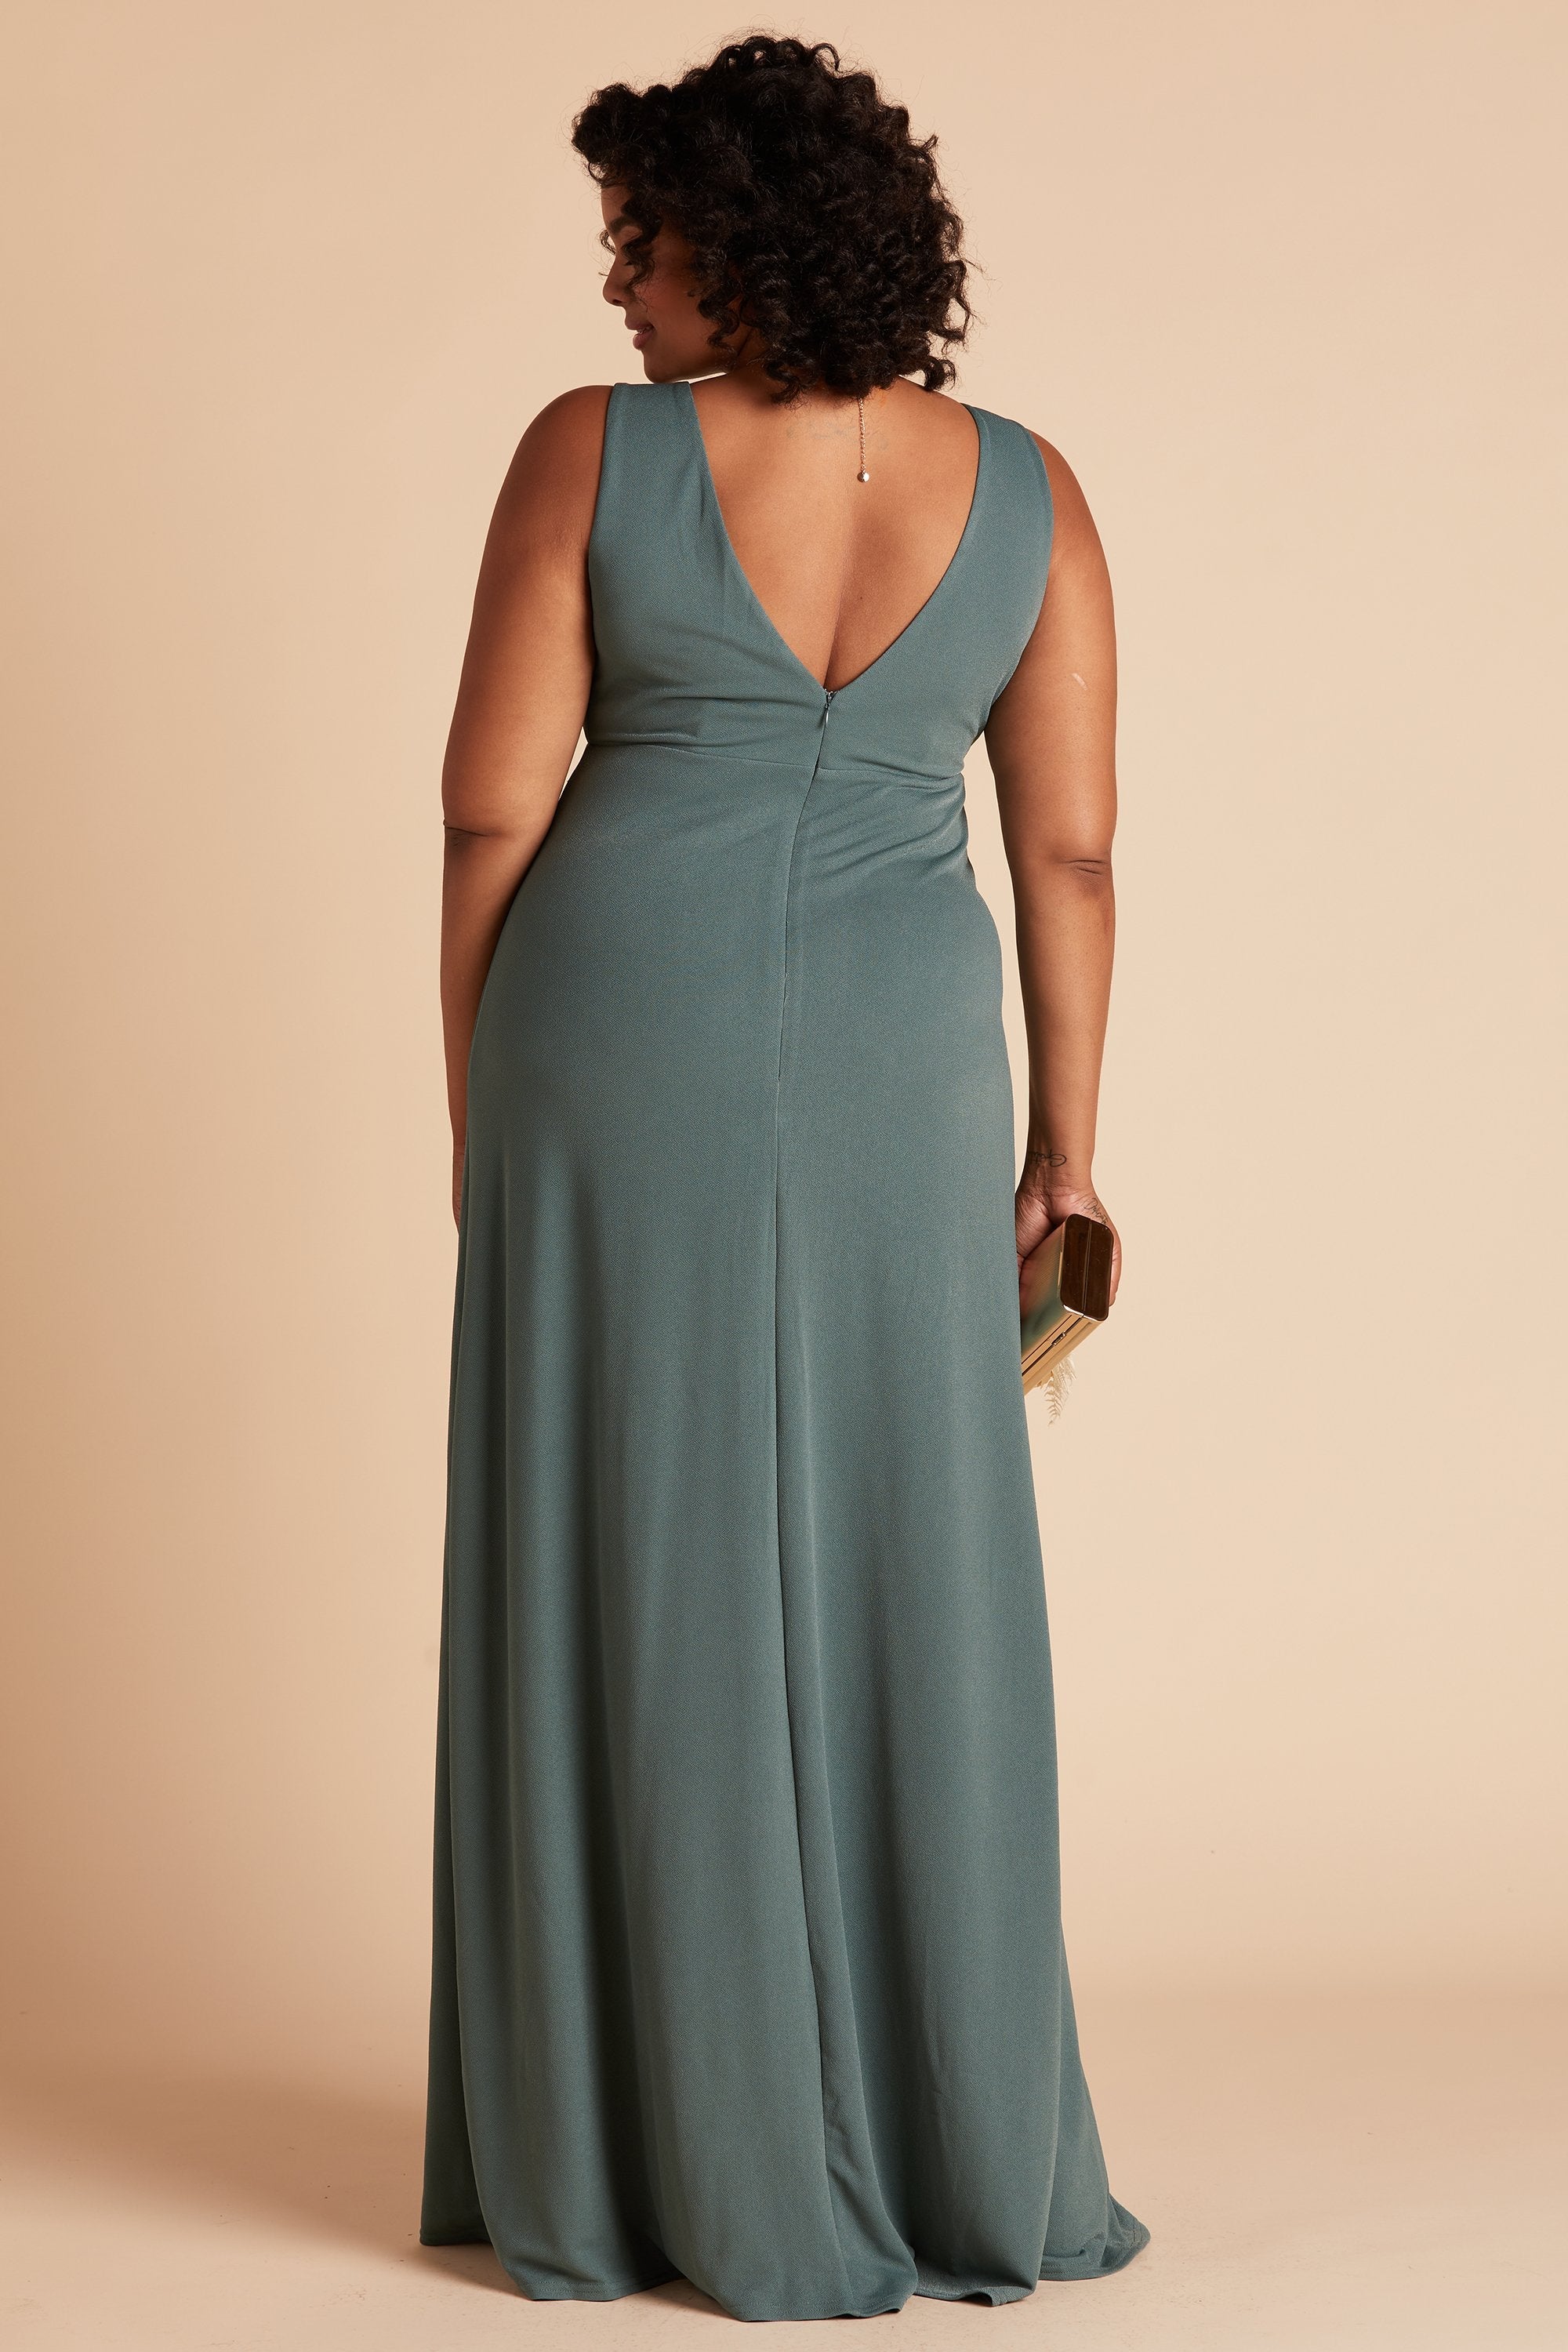 Shamin plus size bridesmaid dress with slit in sea glass green chiffon by Birdy Grey, back view